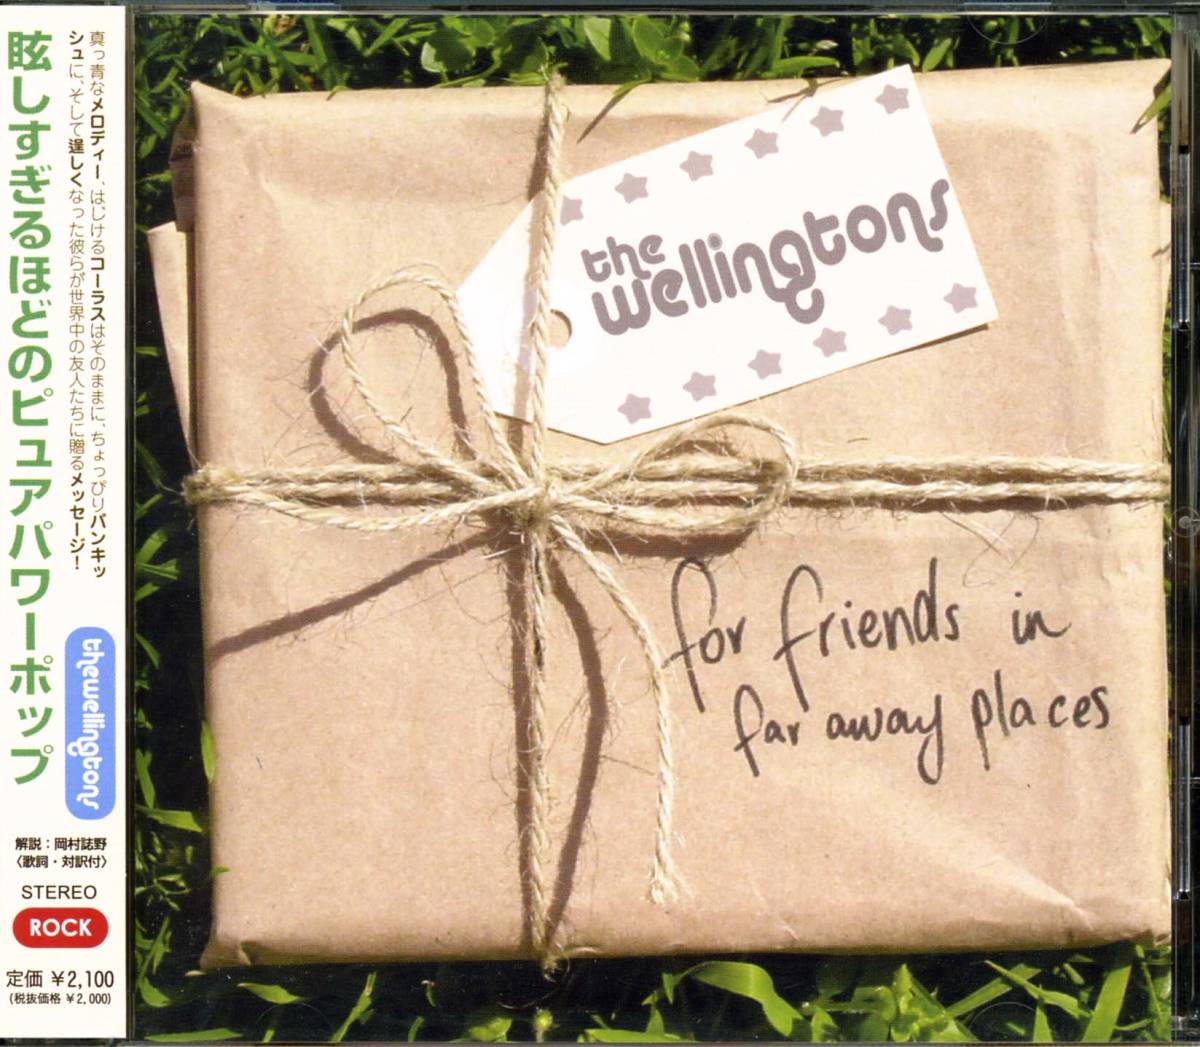 The WELLINGTONS*For Friends in Far Away Places [we Lynn тонн z,SARAH SARAH,SWEETCHUCK]